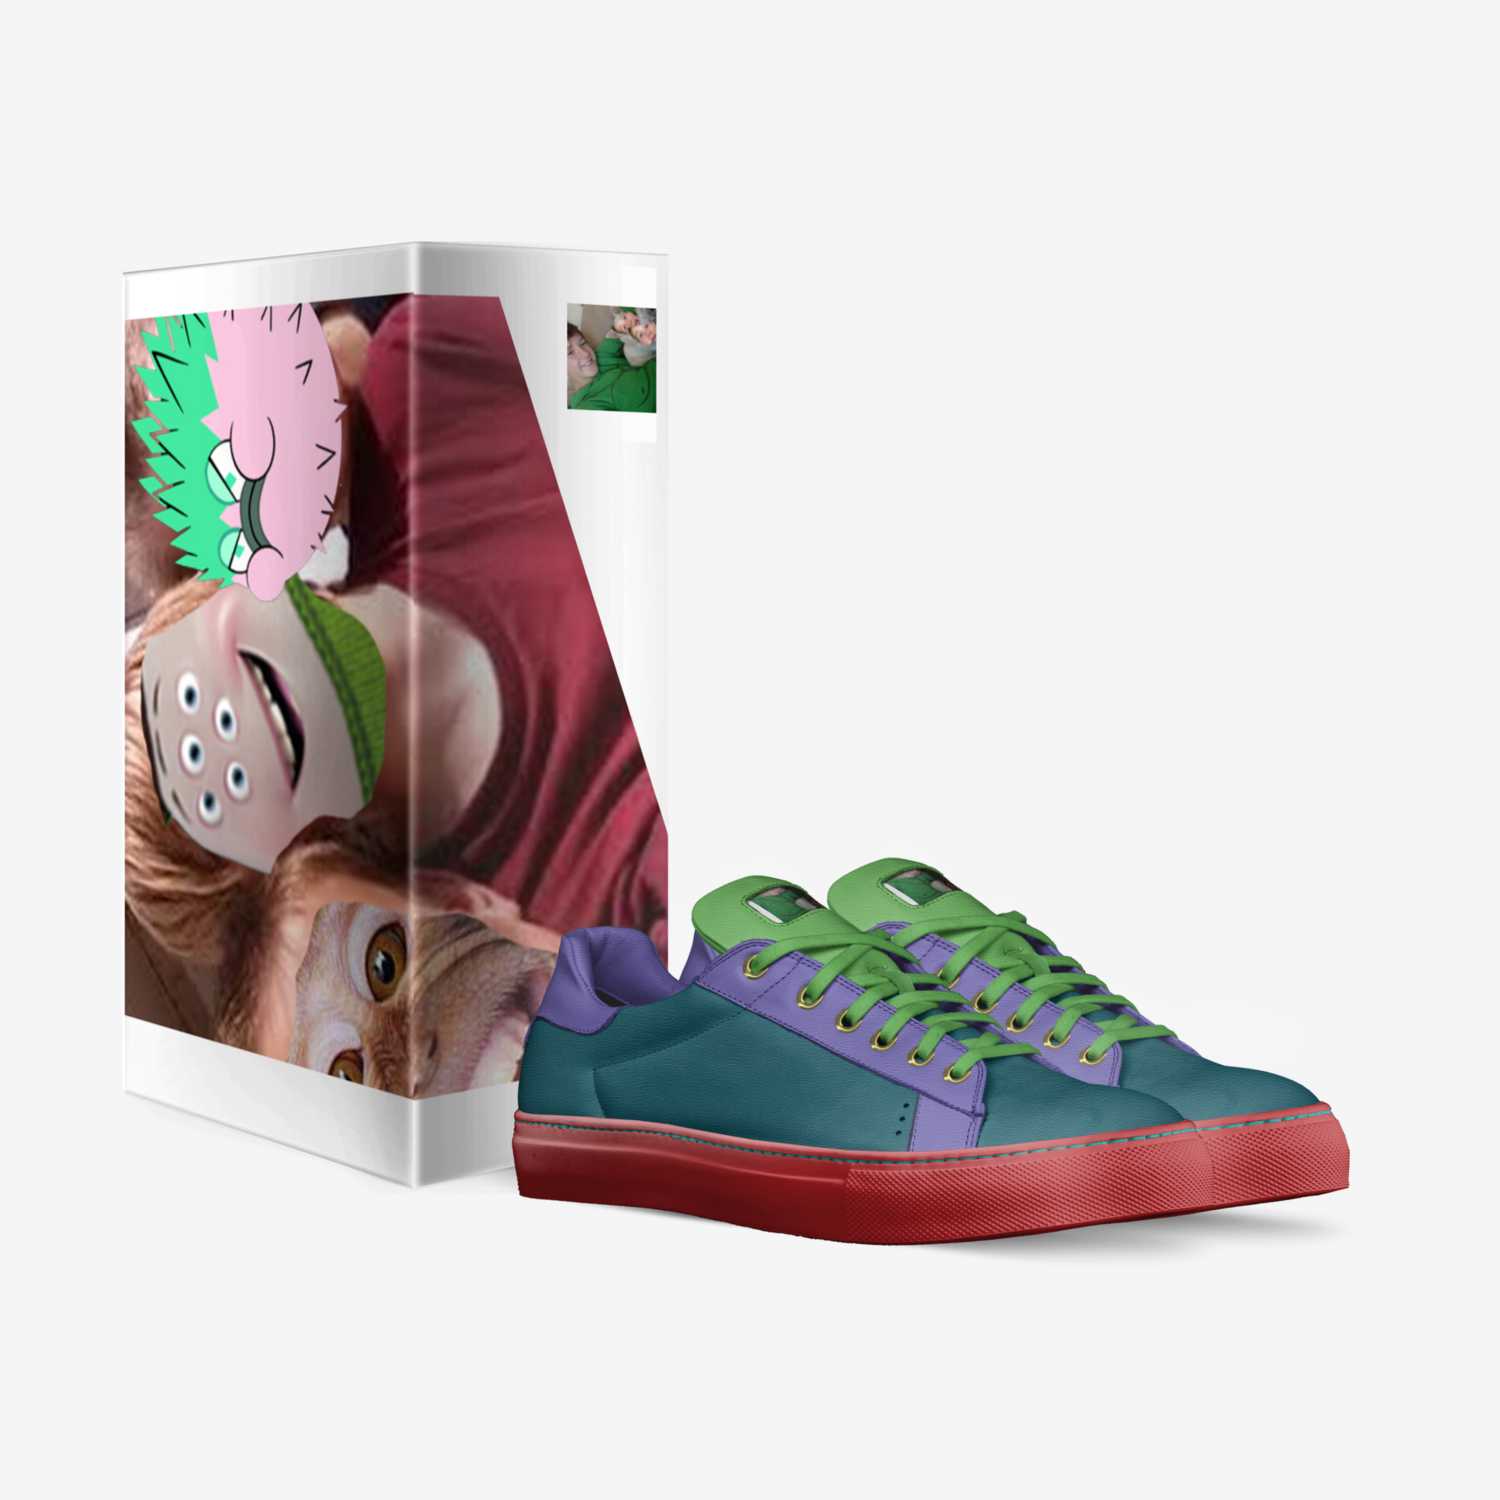 DrtyGraphics custom made in Italy shoes by Ayden | Box view